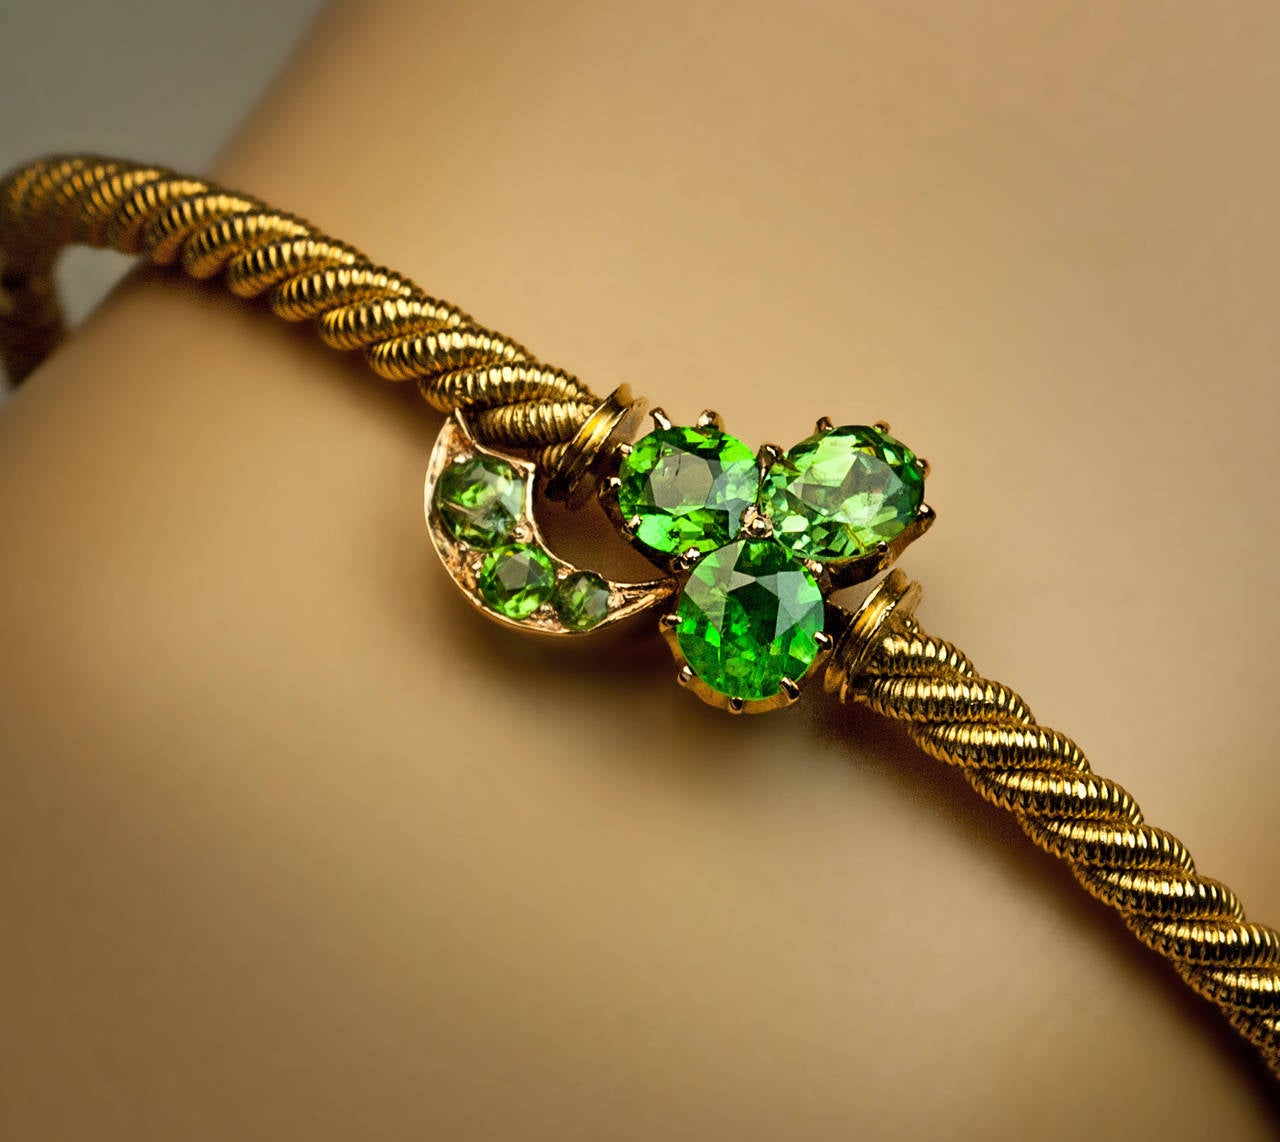 14K gold swirl bangle bracelet centered with a stylized clover set with sparkling vivid green Russian demantoids, made in Saratov (Russia) between 1882 and 1898, marked with 56 zolotnik gold standard and maker's initials

inner circumference 17.5